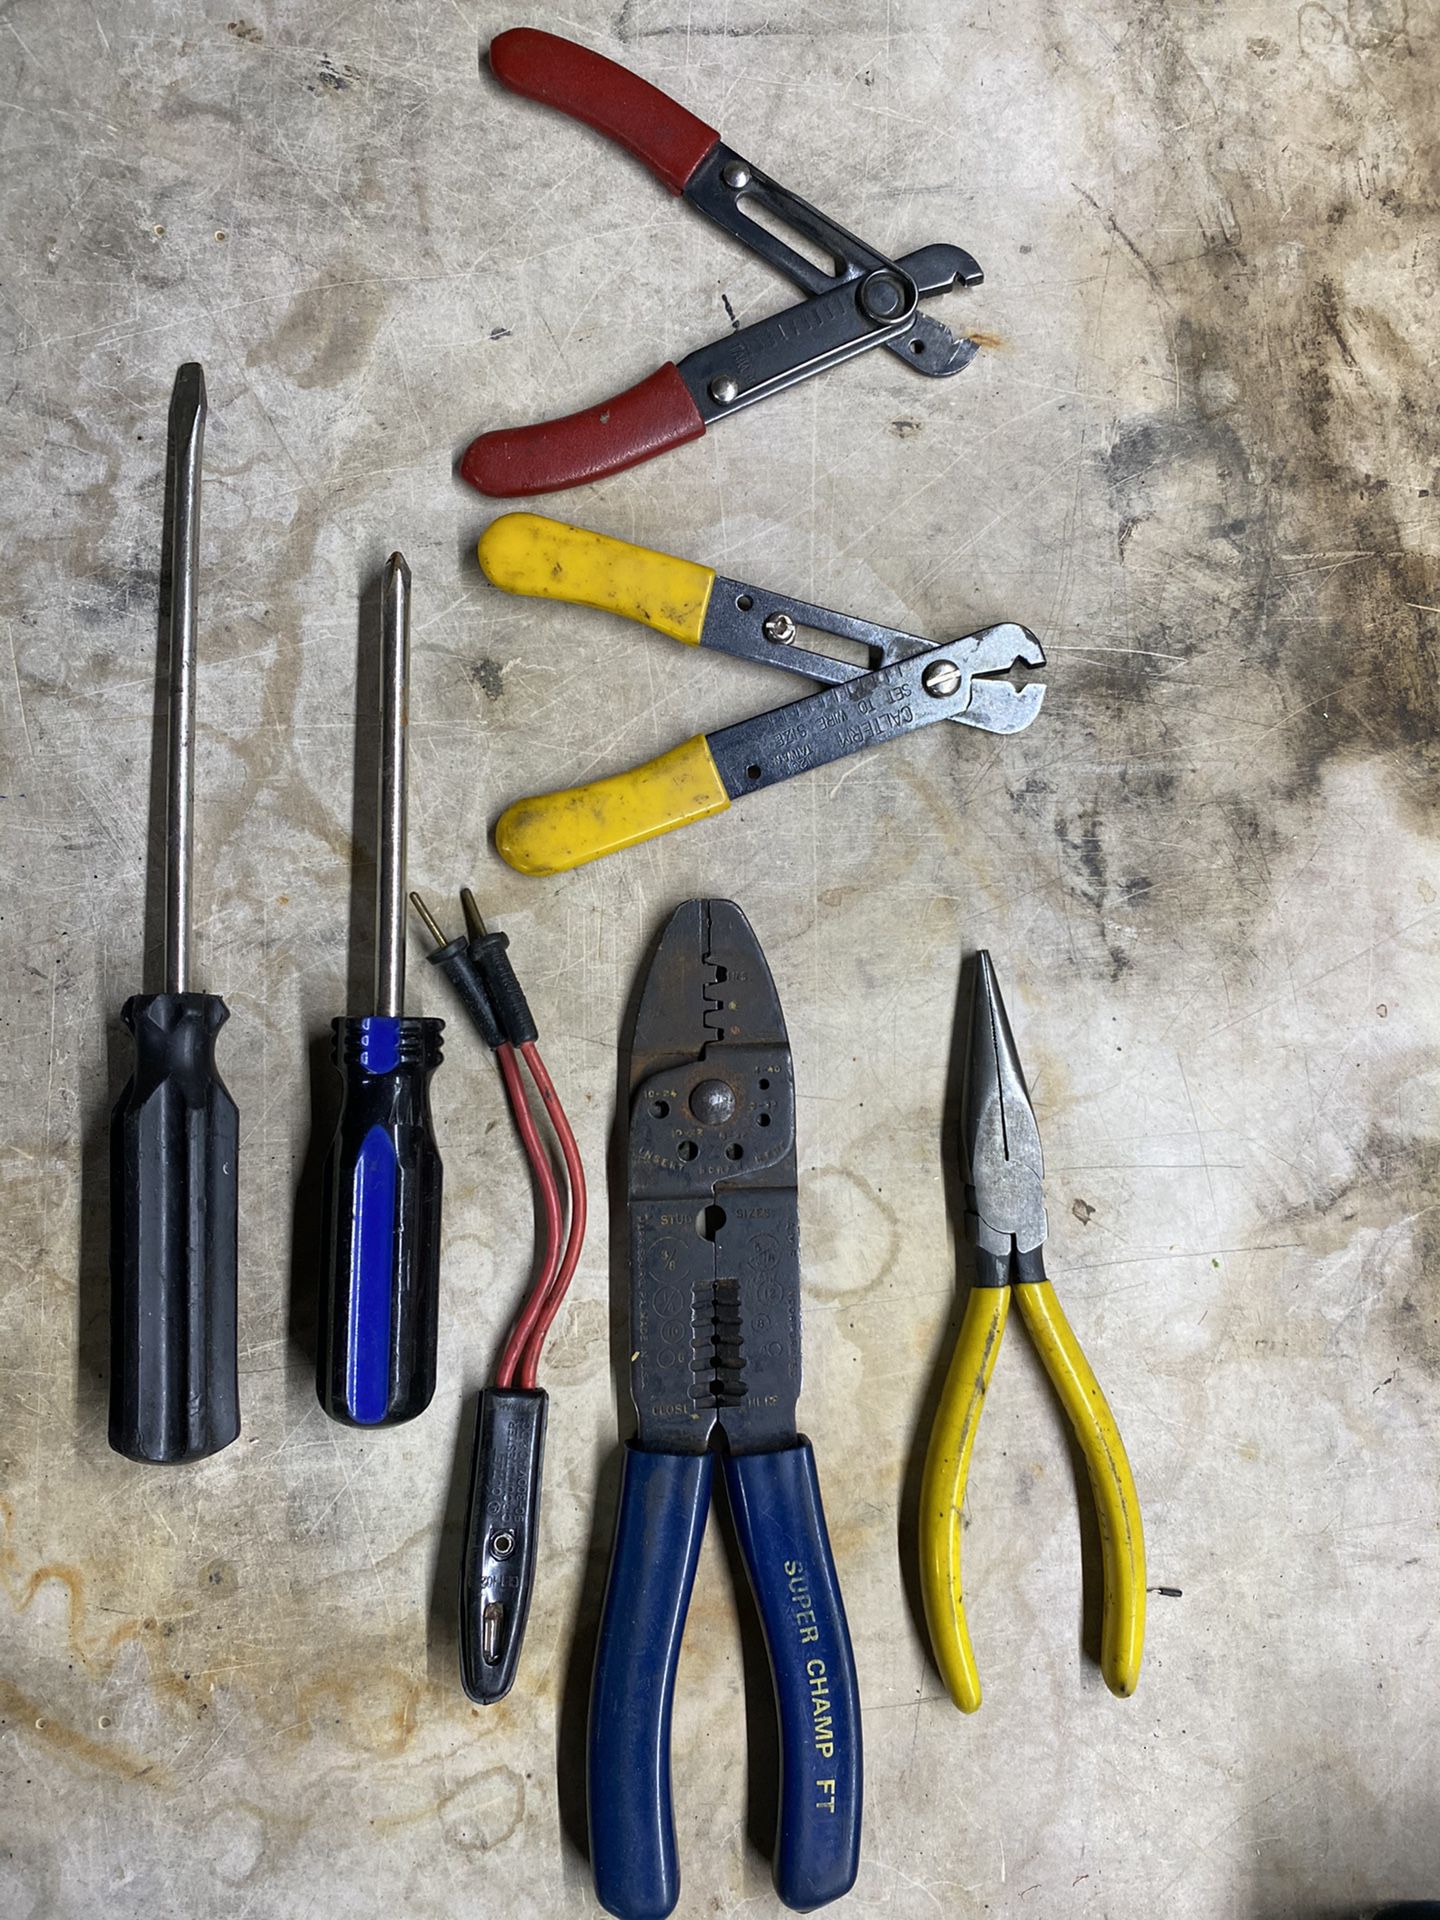 Wire Cutter, Stripper and Crimping tool, 120 volt tester and Screw drivers